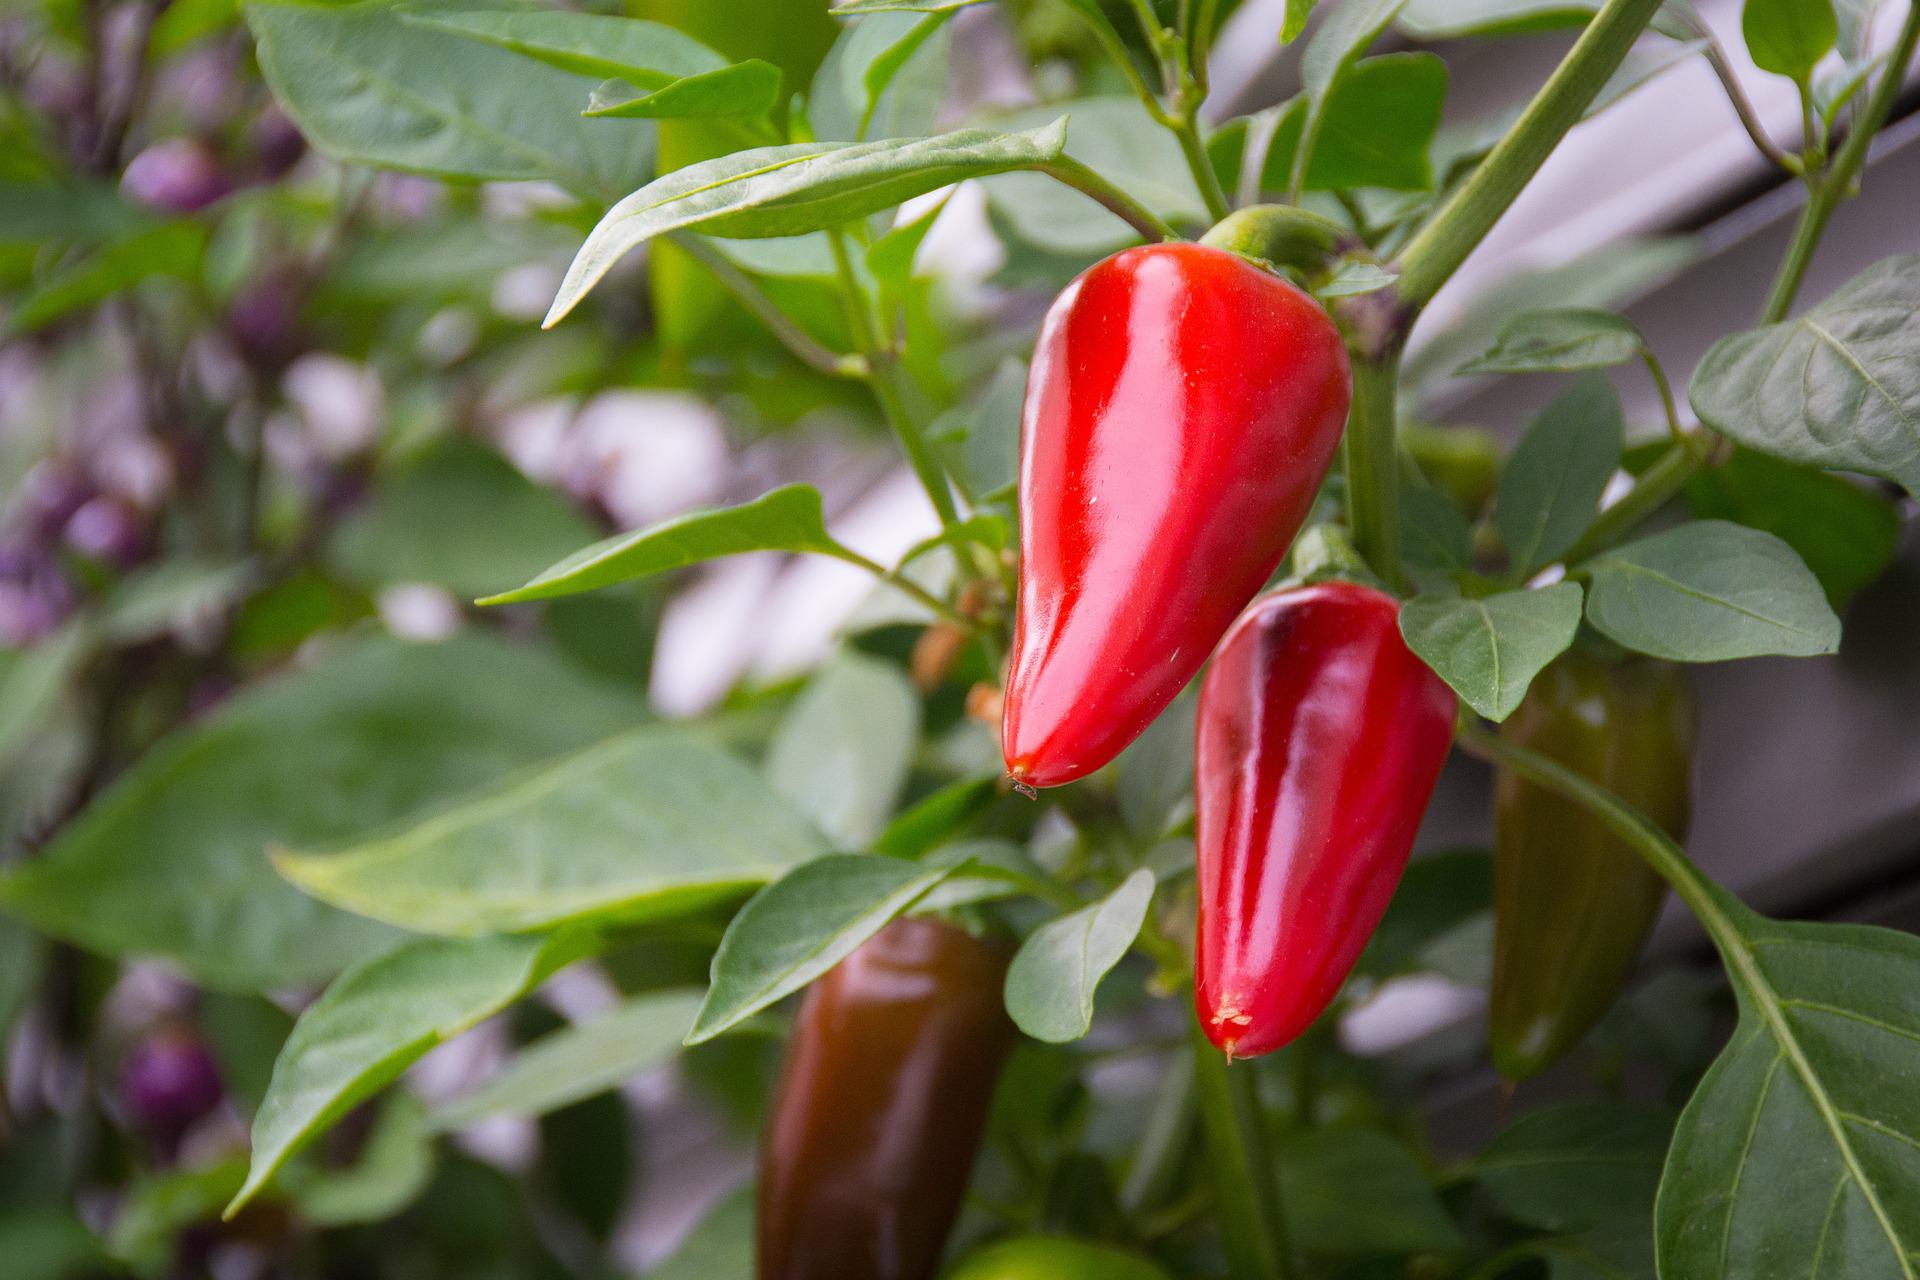 How To Grow Chilli Plants - Red Chillies Growing On Plant